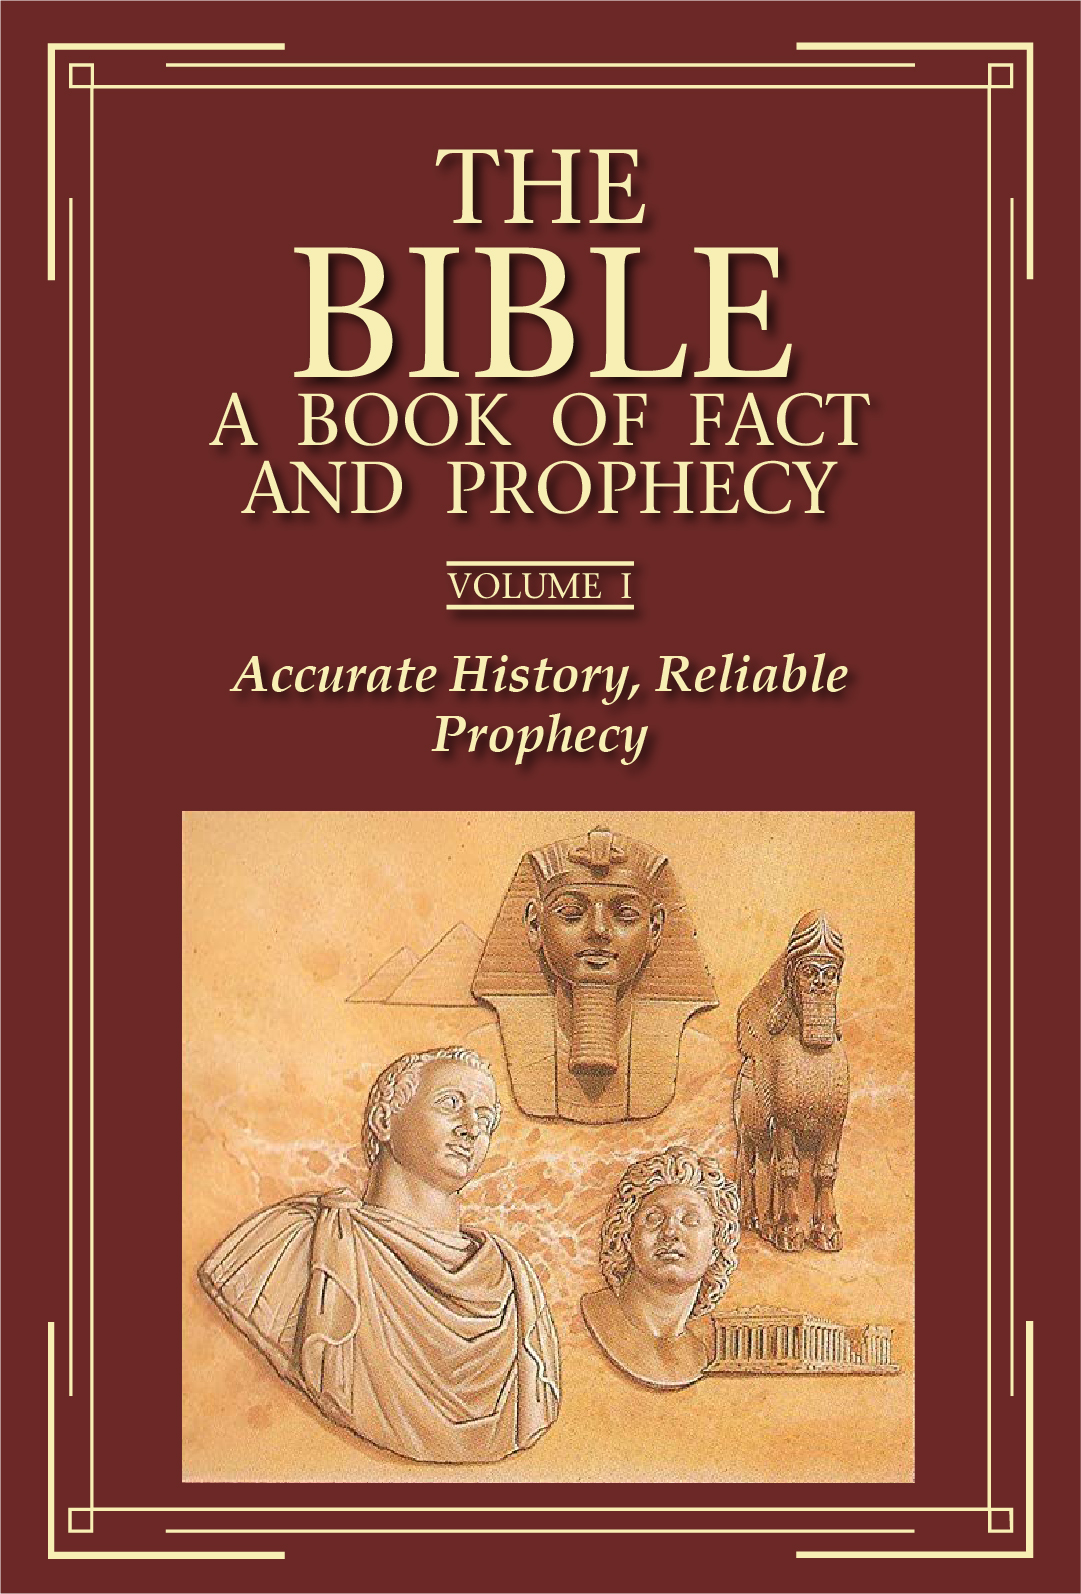 The Bible, a Book of Fact and Prophecy, Volume I: Accurate History, Reliable Prophecy (1993) Screenshot 2